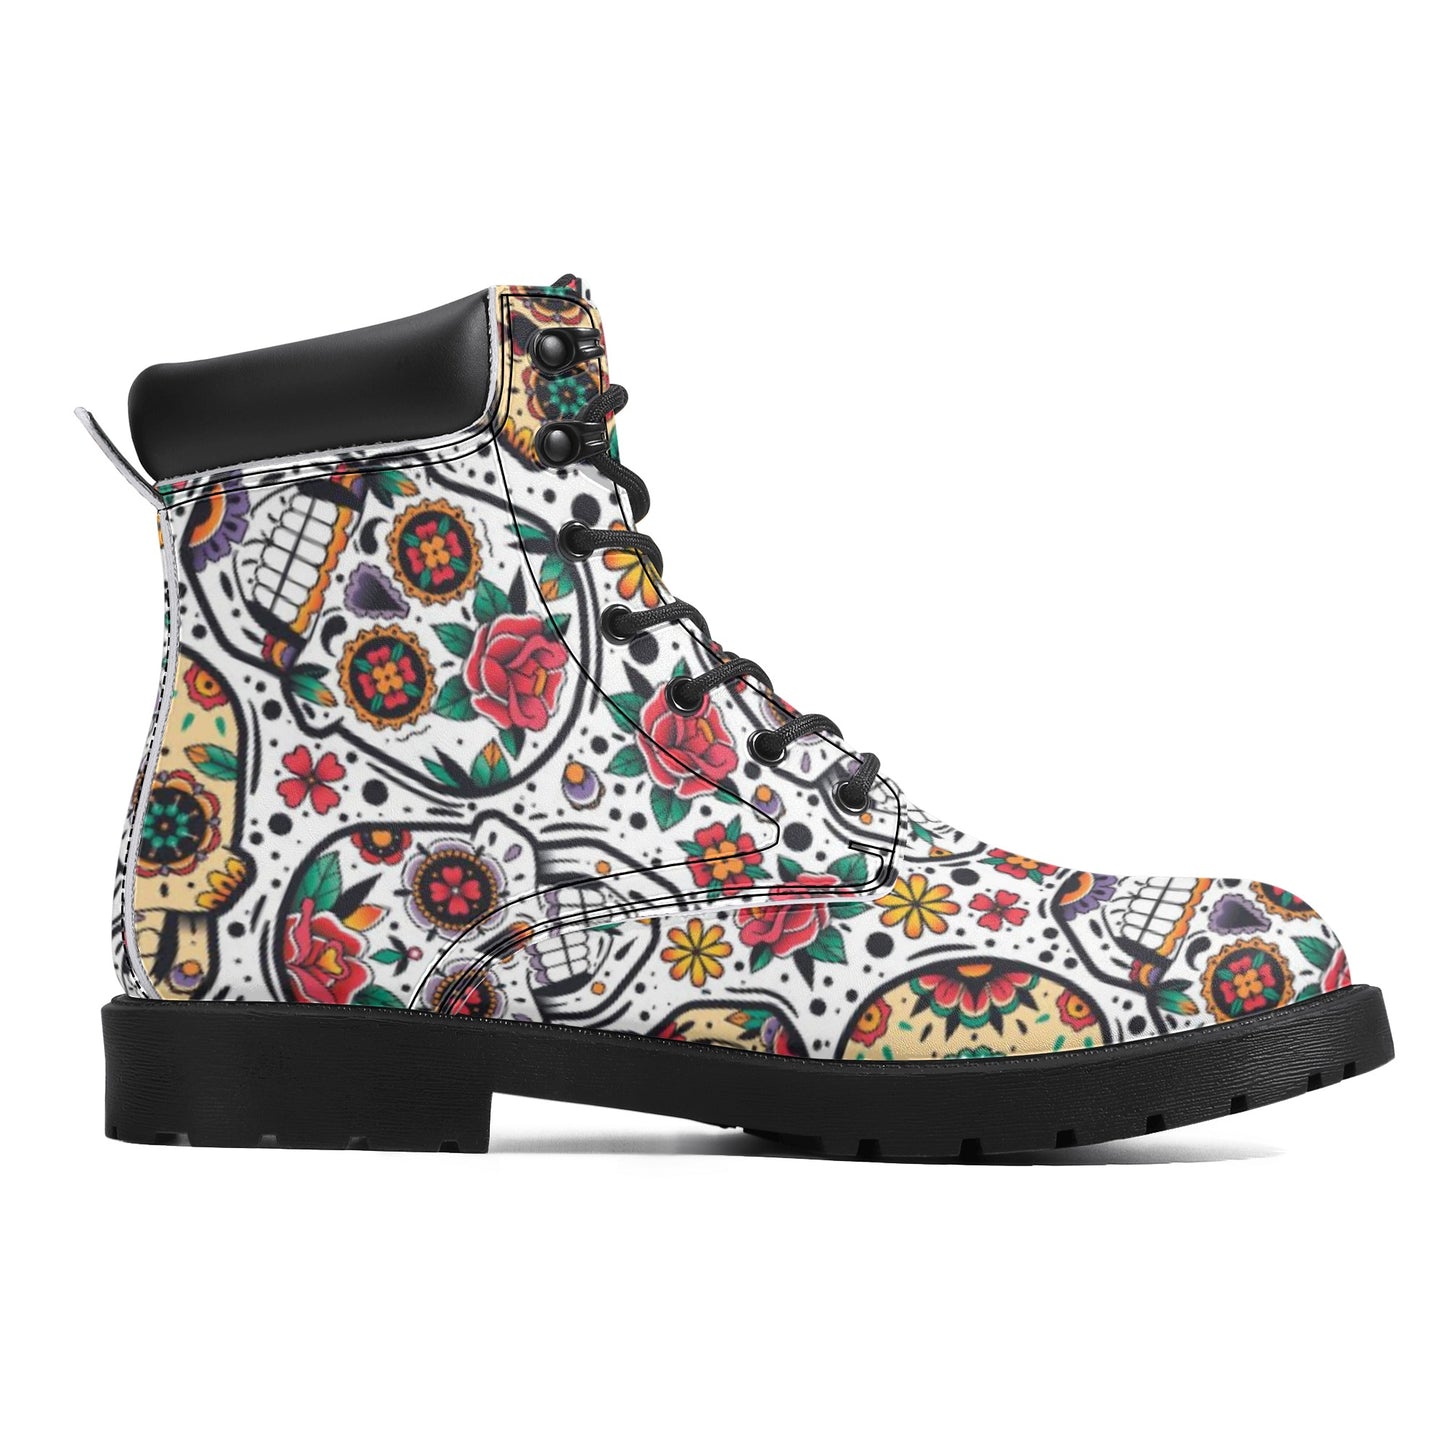 Day of the dead Mexican skull Women's All Season Leather Boots